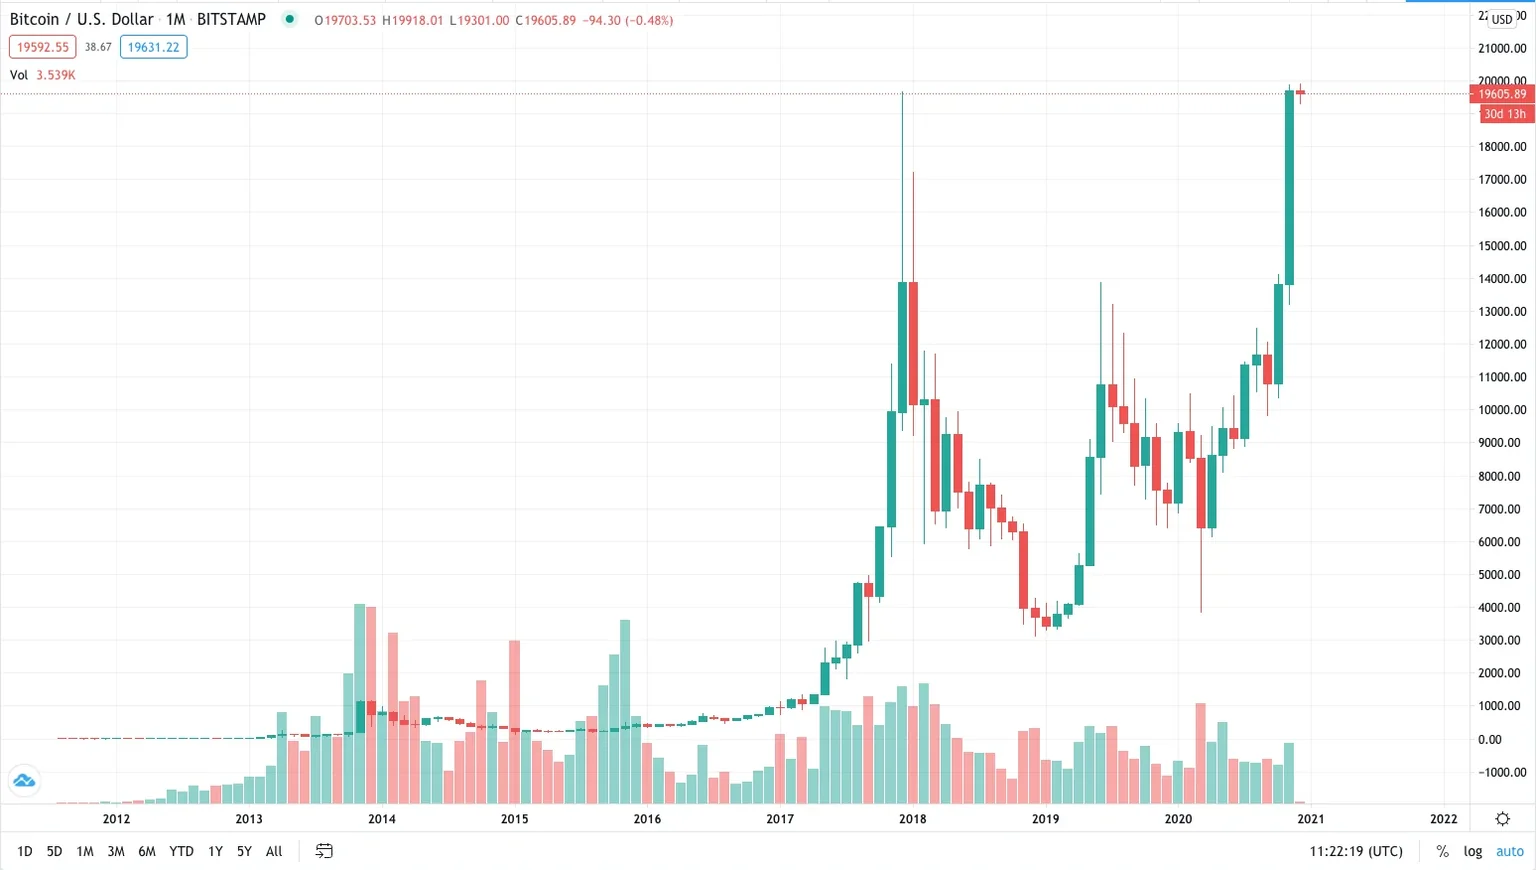 Bitcoin hits monthly high